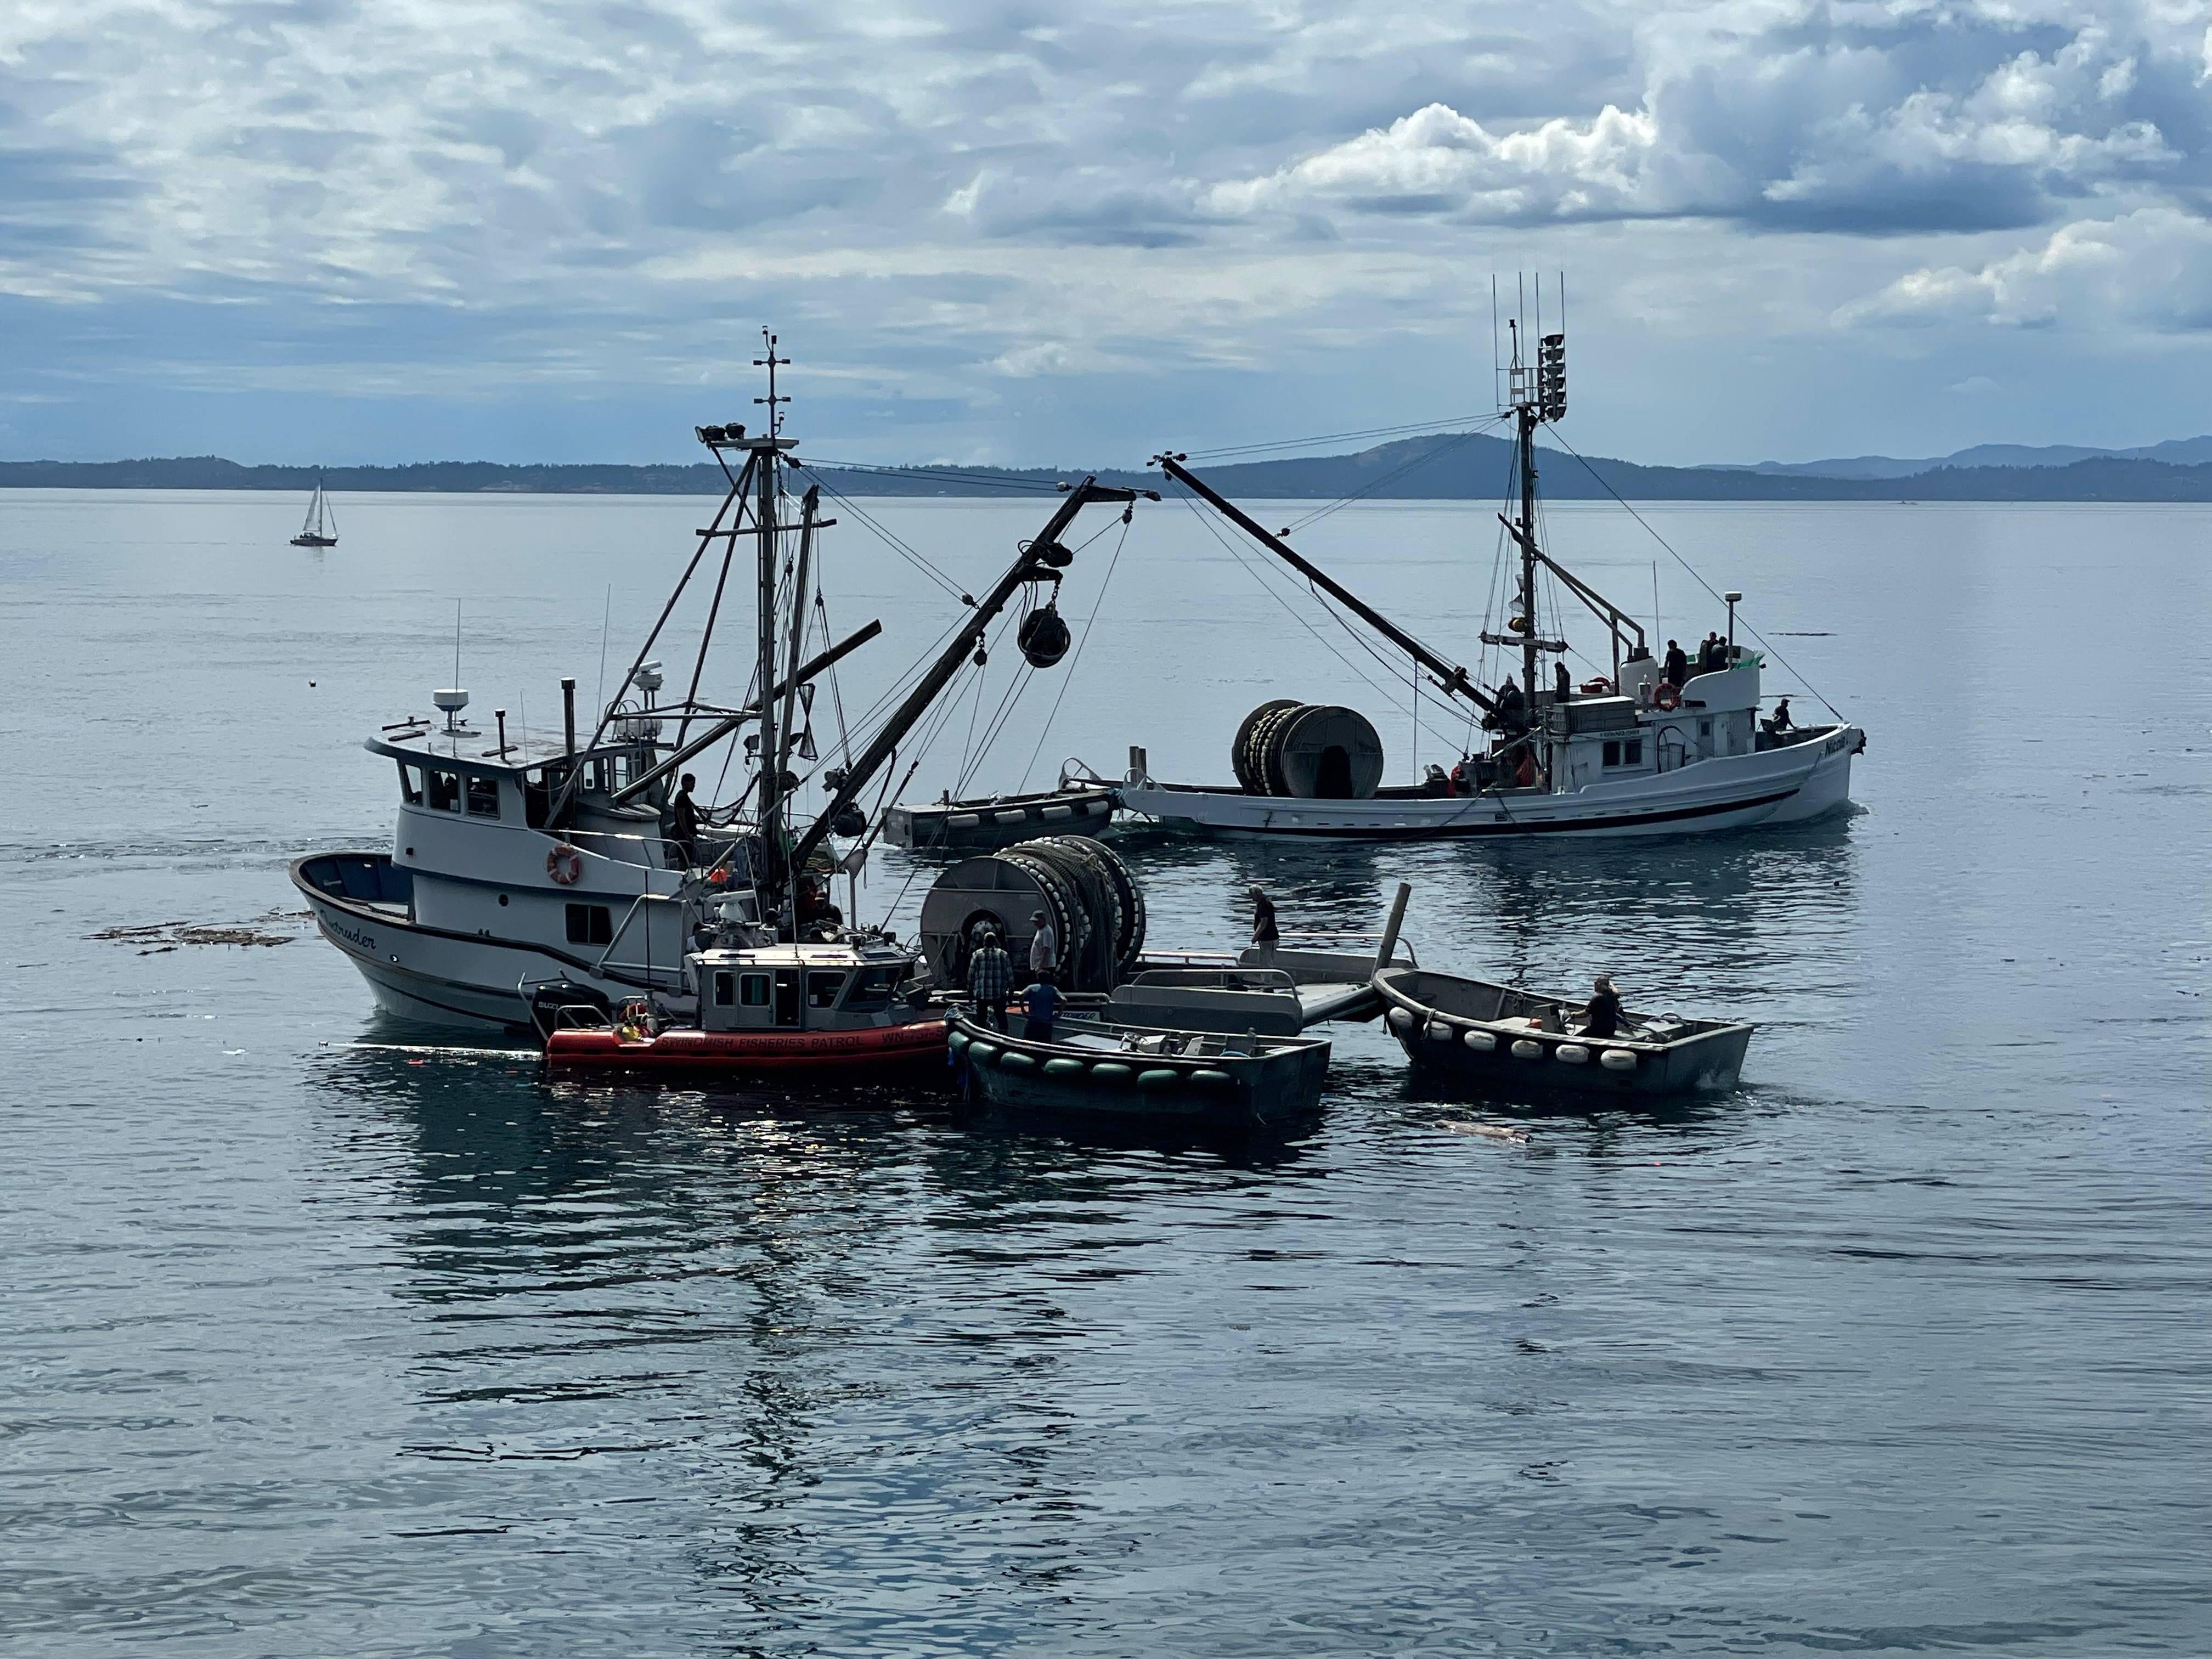 KUOW - Fishing boat that sank in orca waters ran into trouble 24 hours  earlier